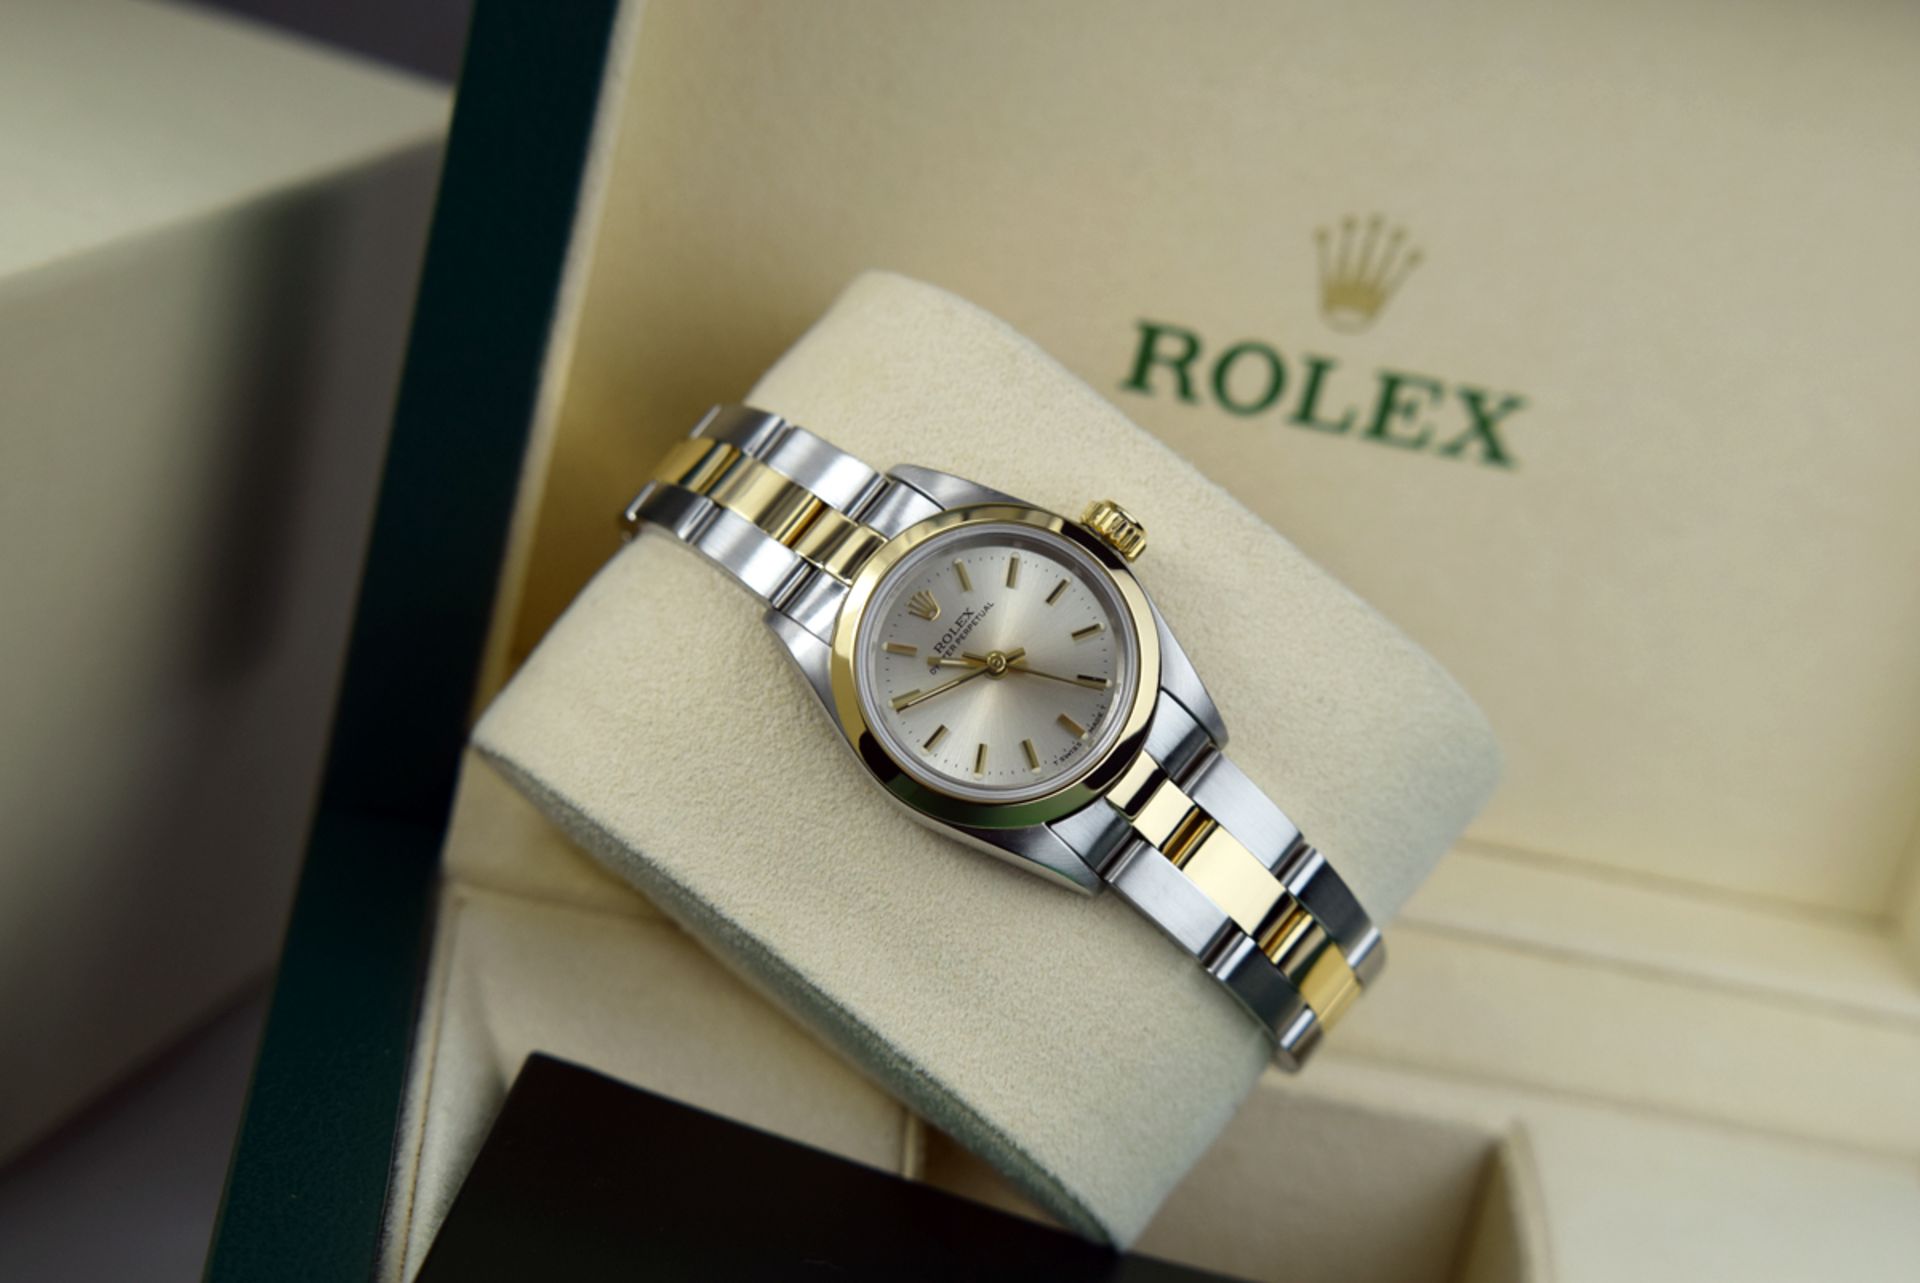 ROLEX Oyster Perpetual - 18k Gold & Steel - Light Champagne Dial - Image 2 of 10